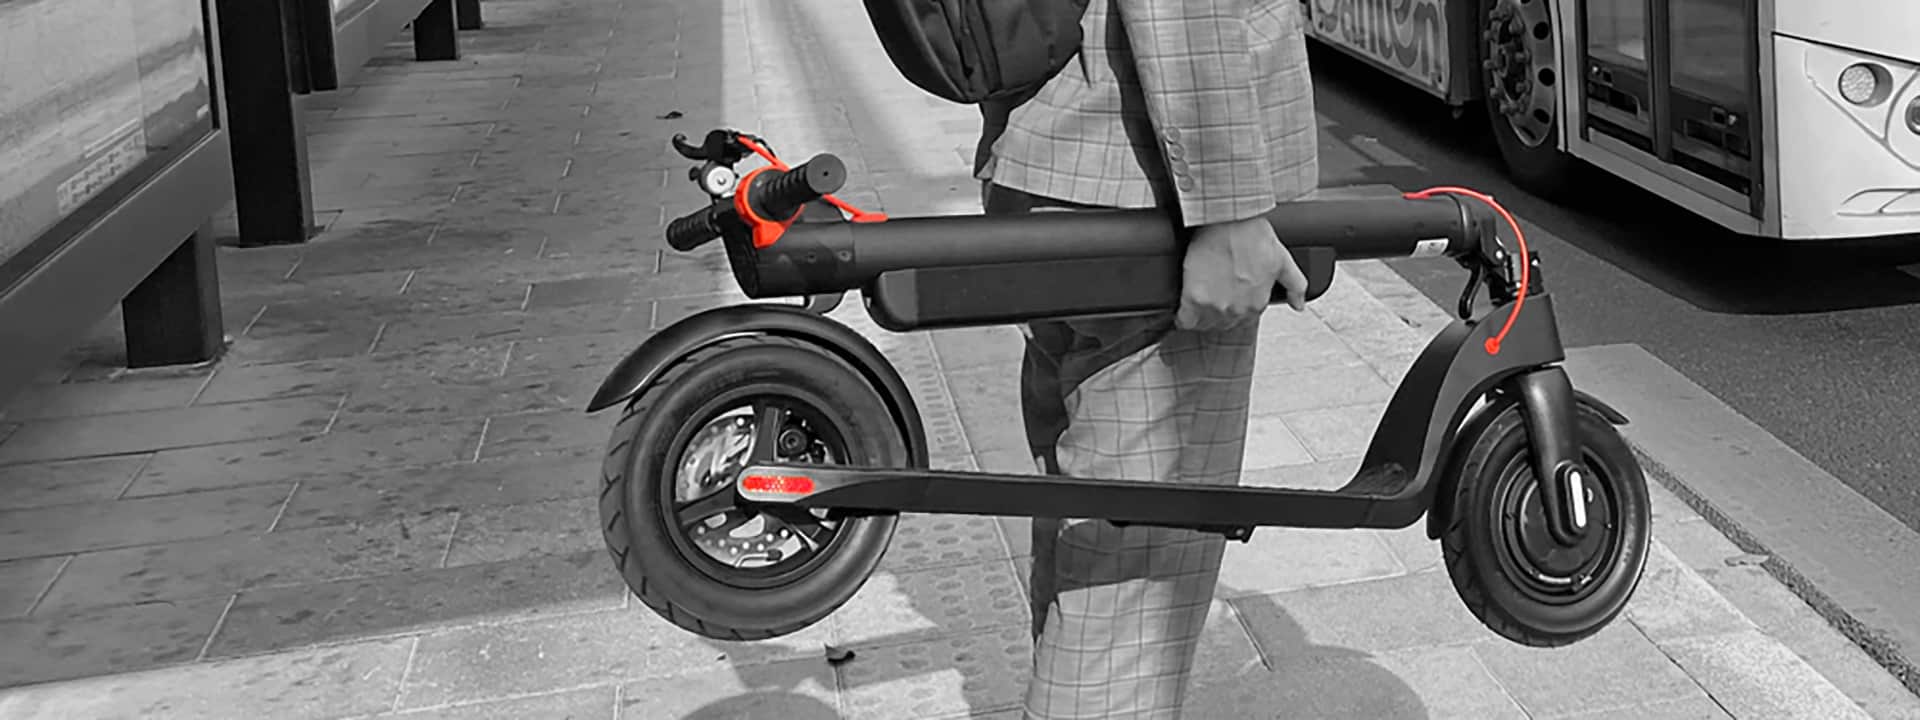 Man carrying portable x8 electric scooter